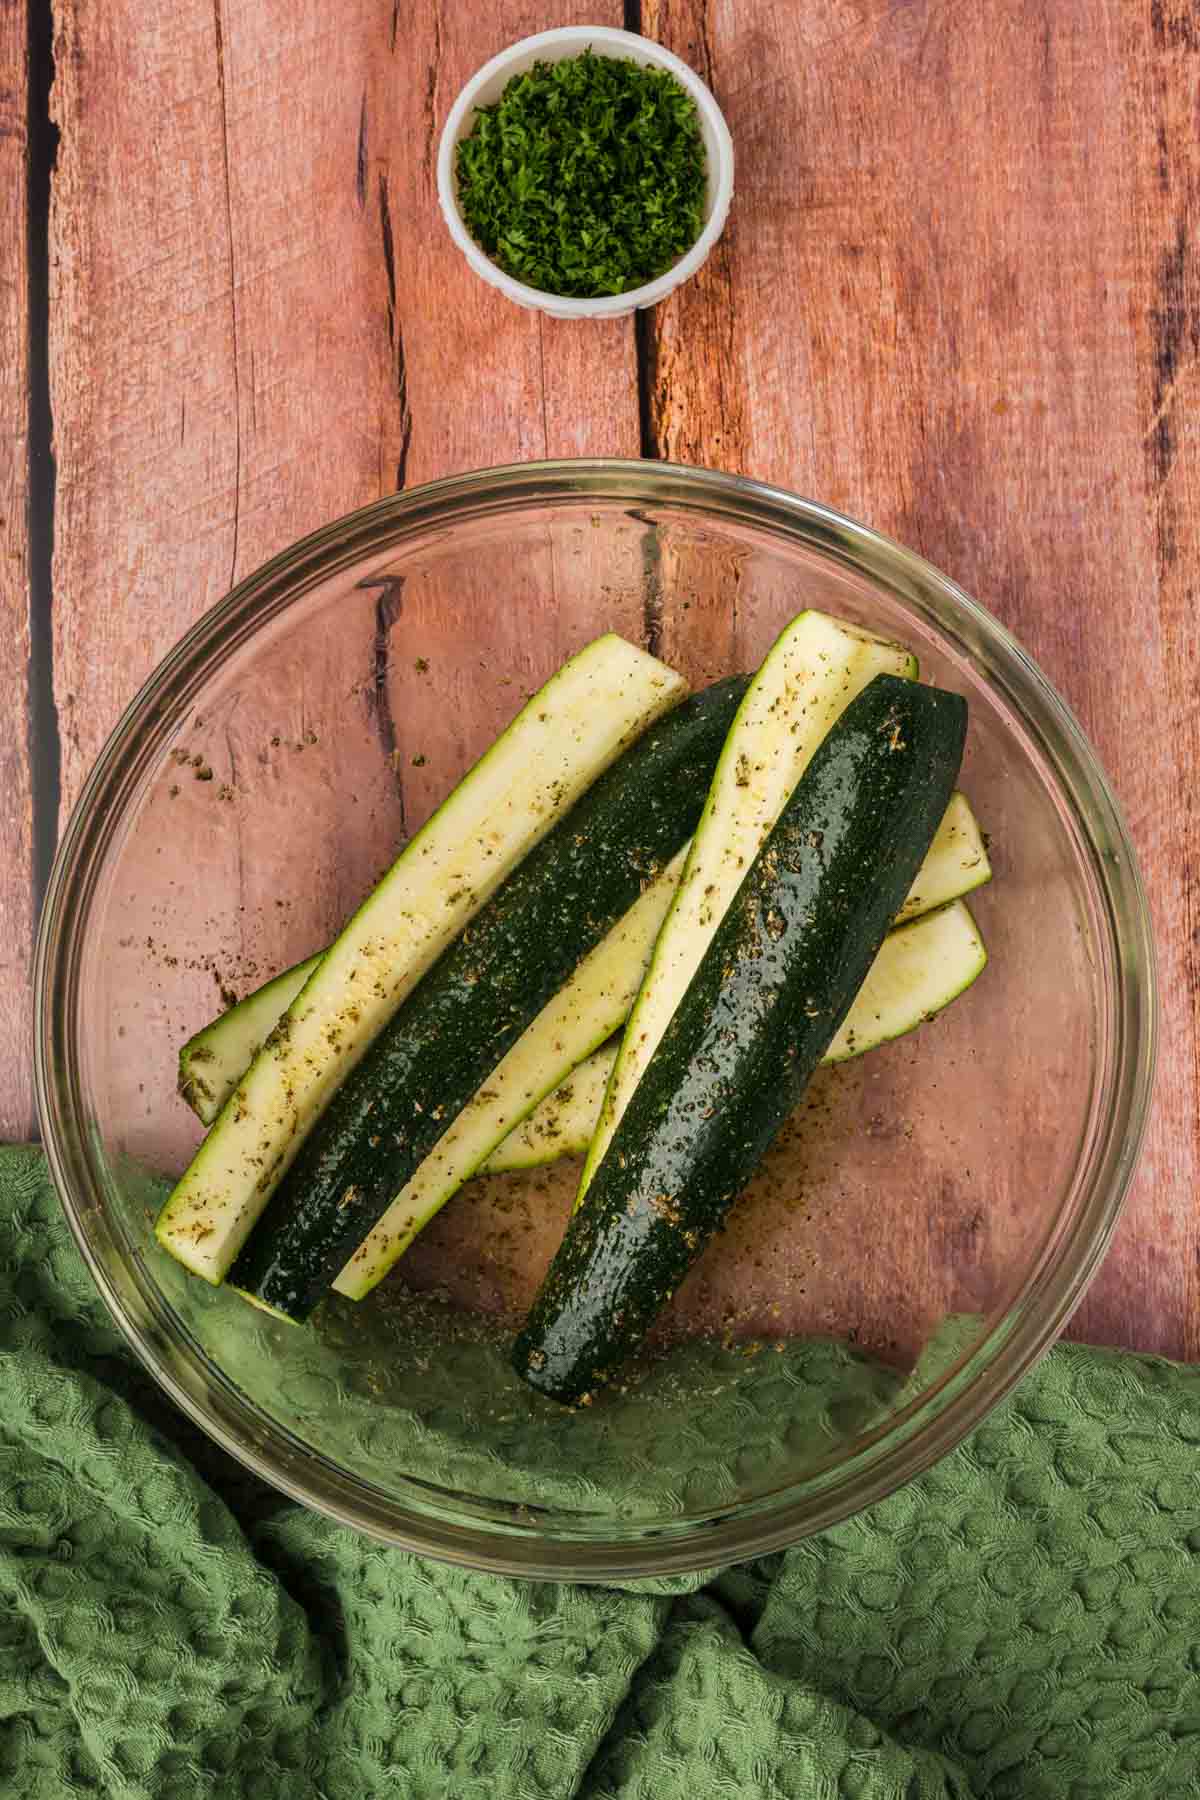 Tossing the zucchini spears with the seasoning in a bowl